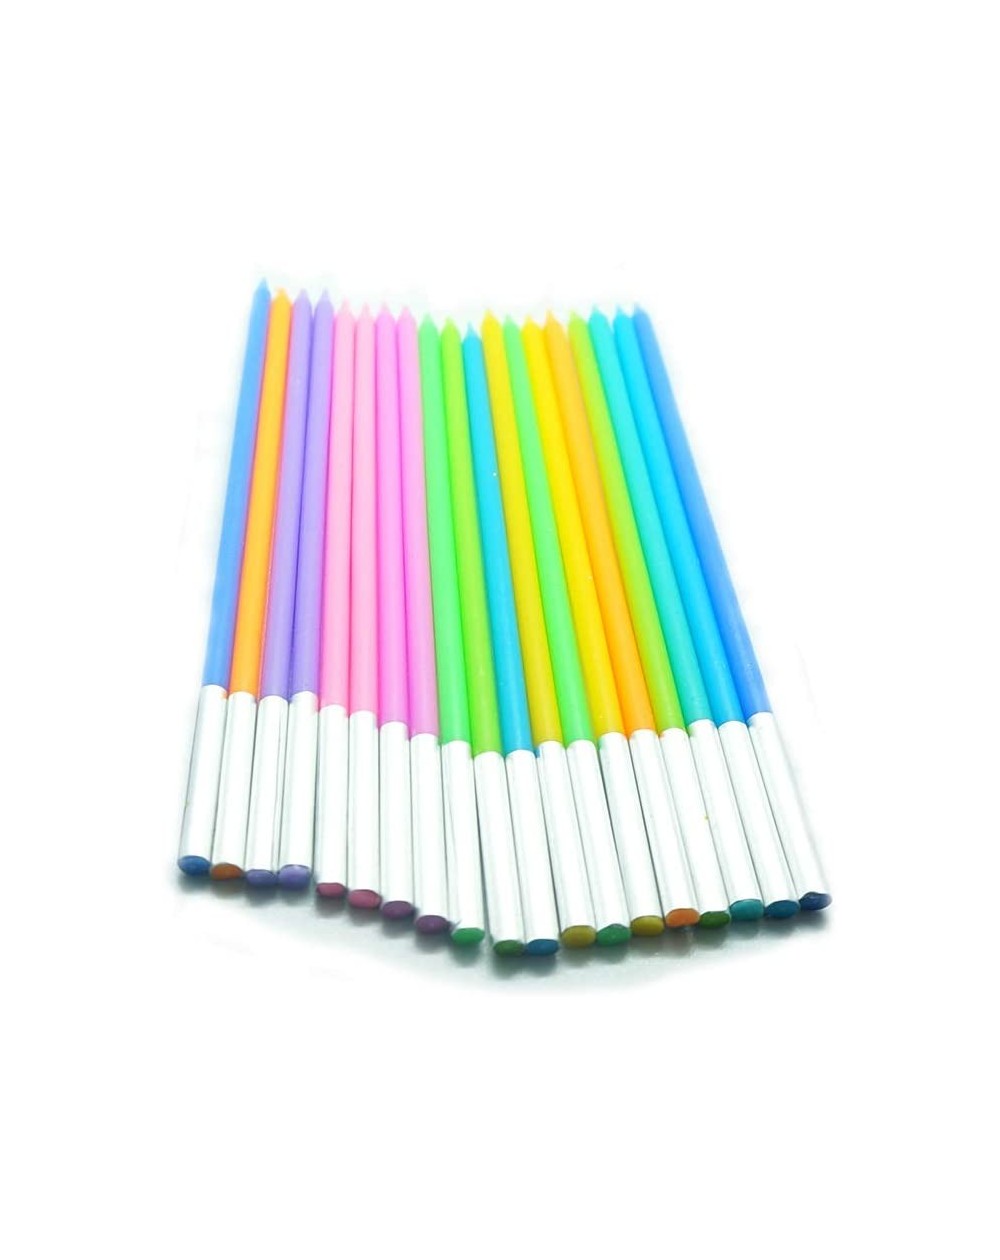 Birthday Candles 20 Count Party Long Thin Cake Candles Metallic Birthday Candles in Holders for Birthday Cakes Decorations - ...